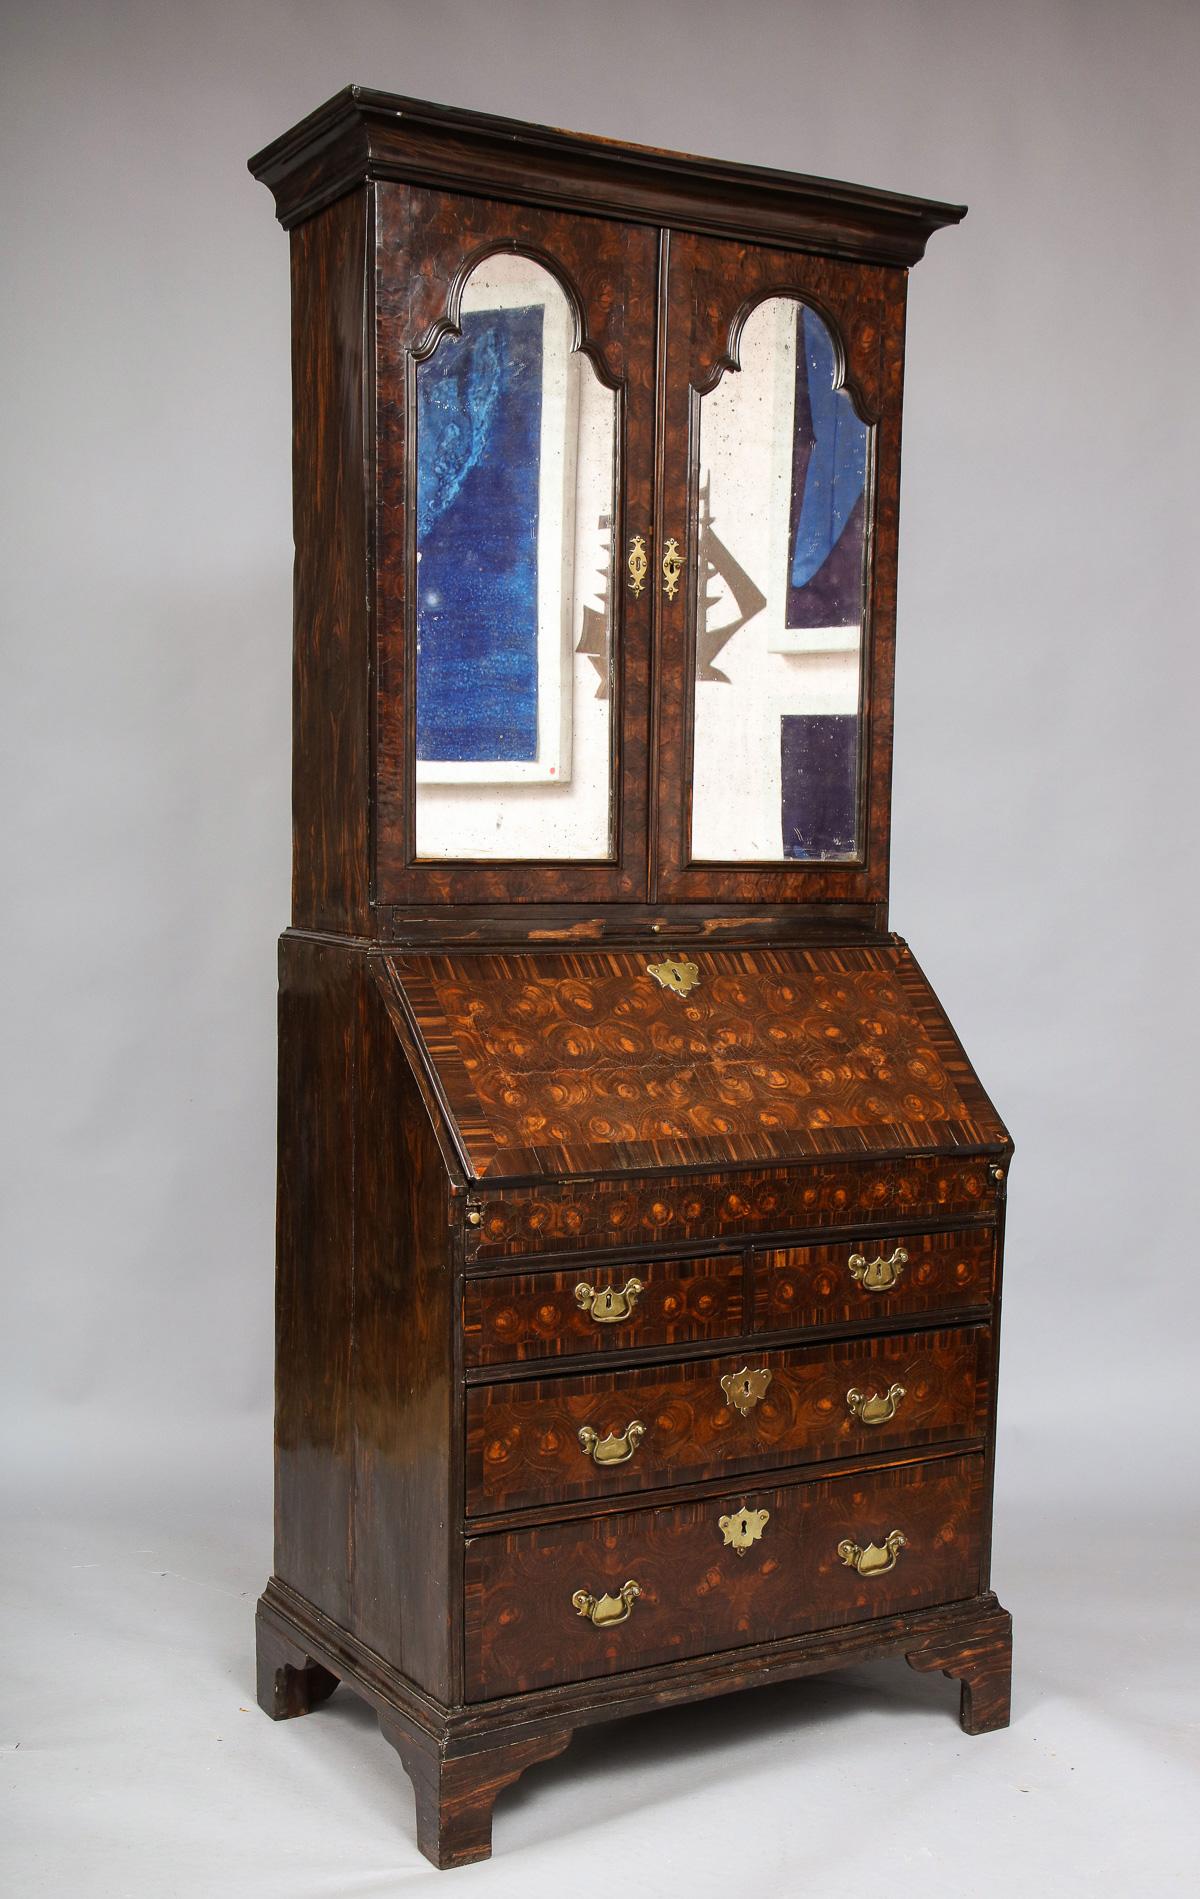 Exceedingly rare early 18th century English colonial Macassar ebony diminutive bureau bookcase with hexagonal oyster veneered doors, lids and drawer fronts, the sides and secondary timbers all in solid streaky ebony having rich patination, The upper